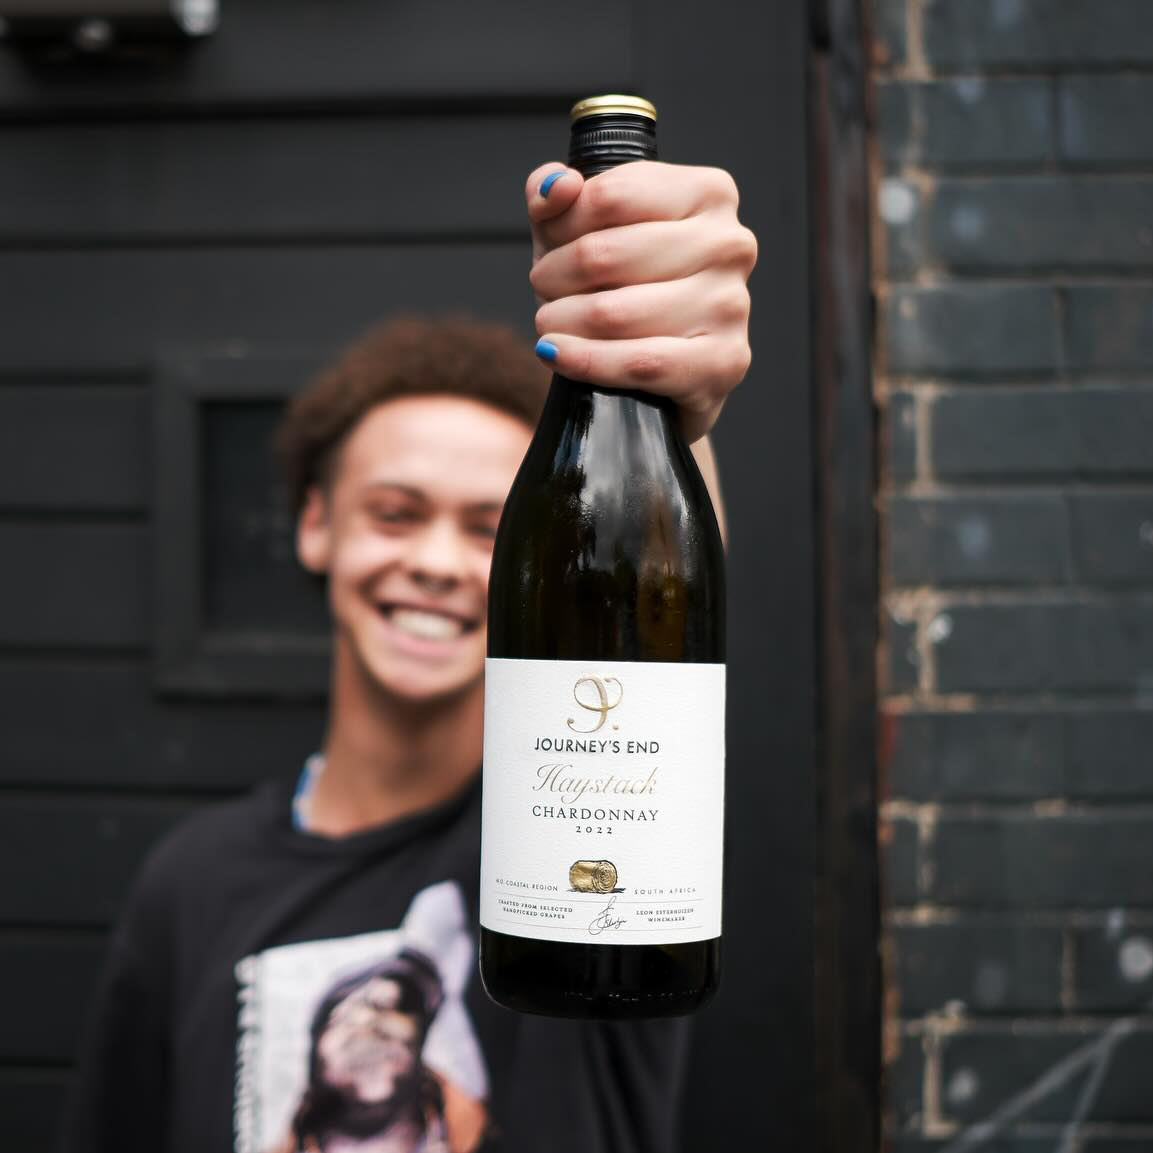 Famed for pushing the boundaries of the cocktail scene, @sin_tax_bar was once the only bar on the African continent to make it into the World’s 50 Best Bars’ top 100. We're delighted our Haystack Chardonnay is included in their wines.